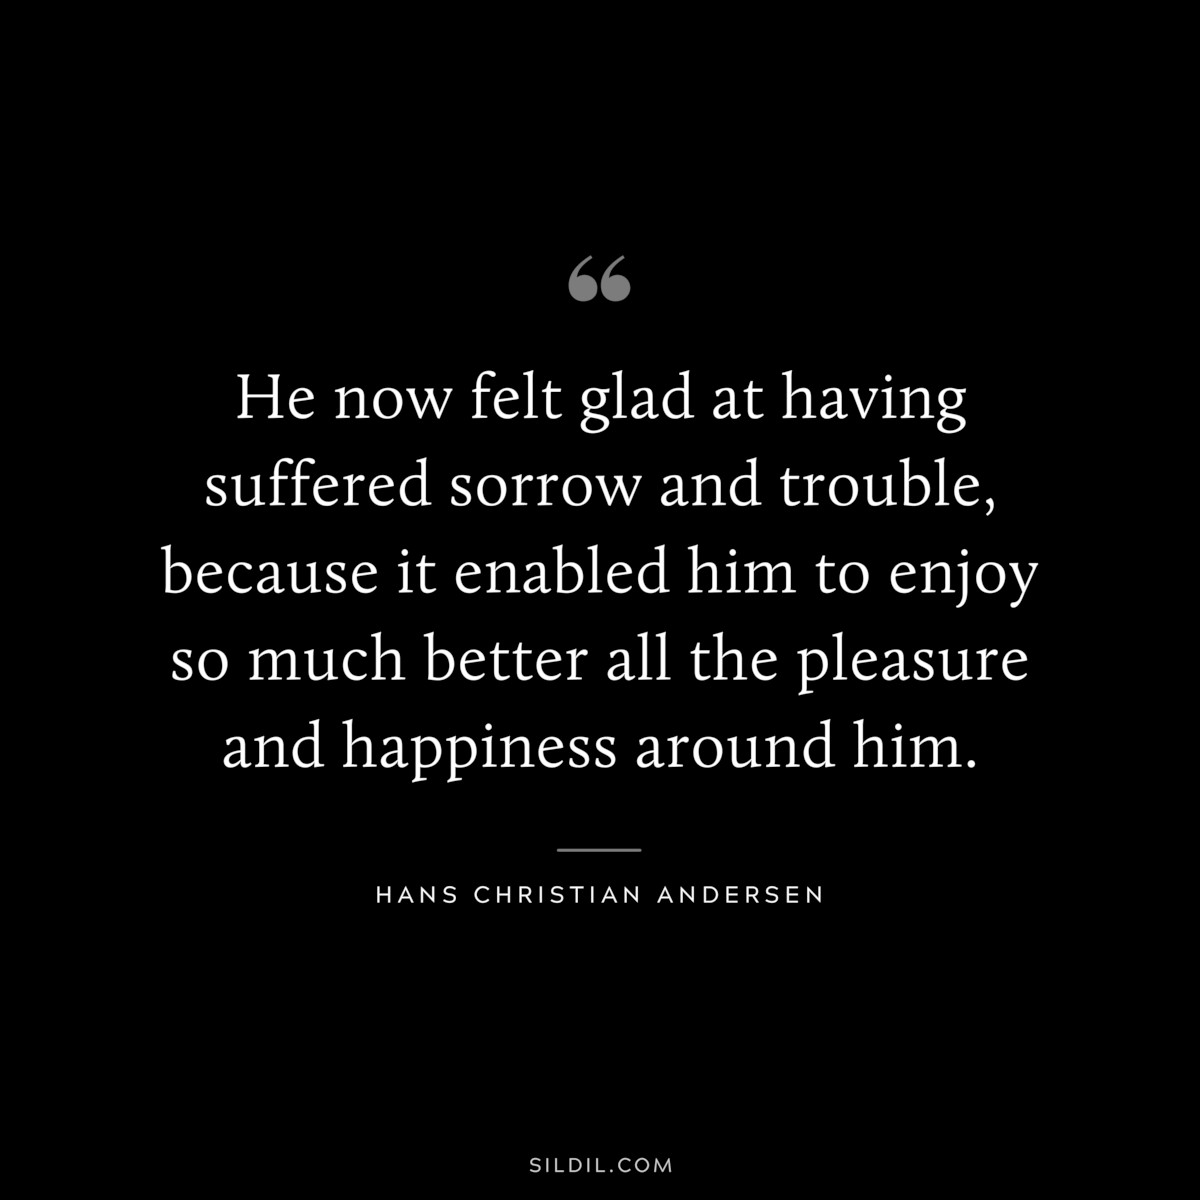 He now felt glad at having suffered sorrow and trouble, because it enabled him to enjoy so much better all the pleasure and happiness around him. ― Hans Christian Andersen